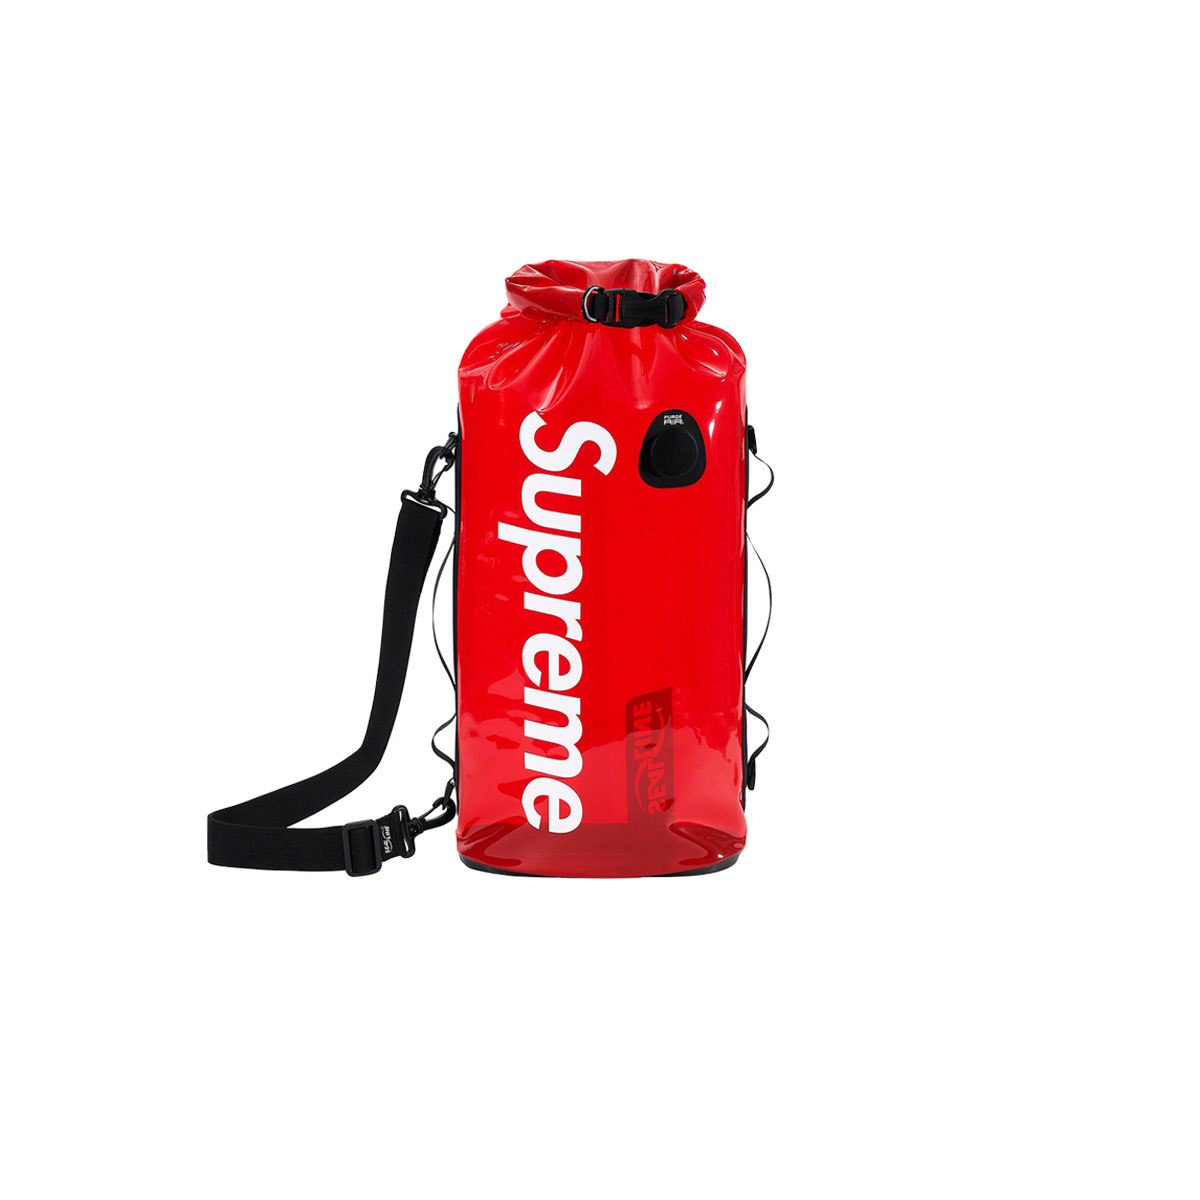 20L】Supreme SealLine Discovery Dry Bag - その他